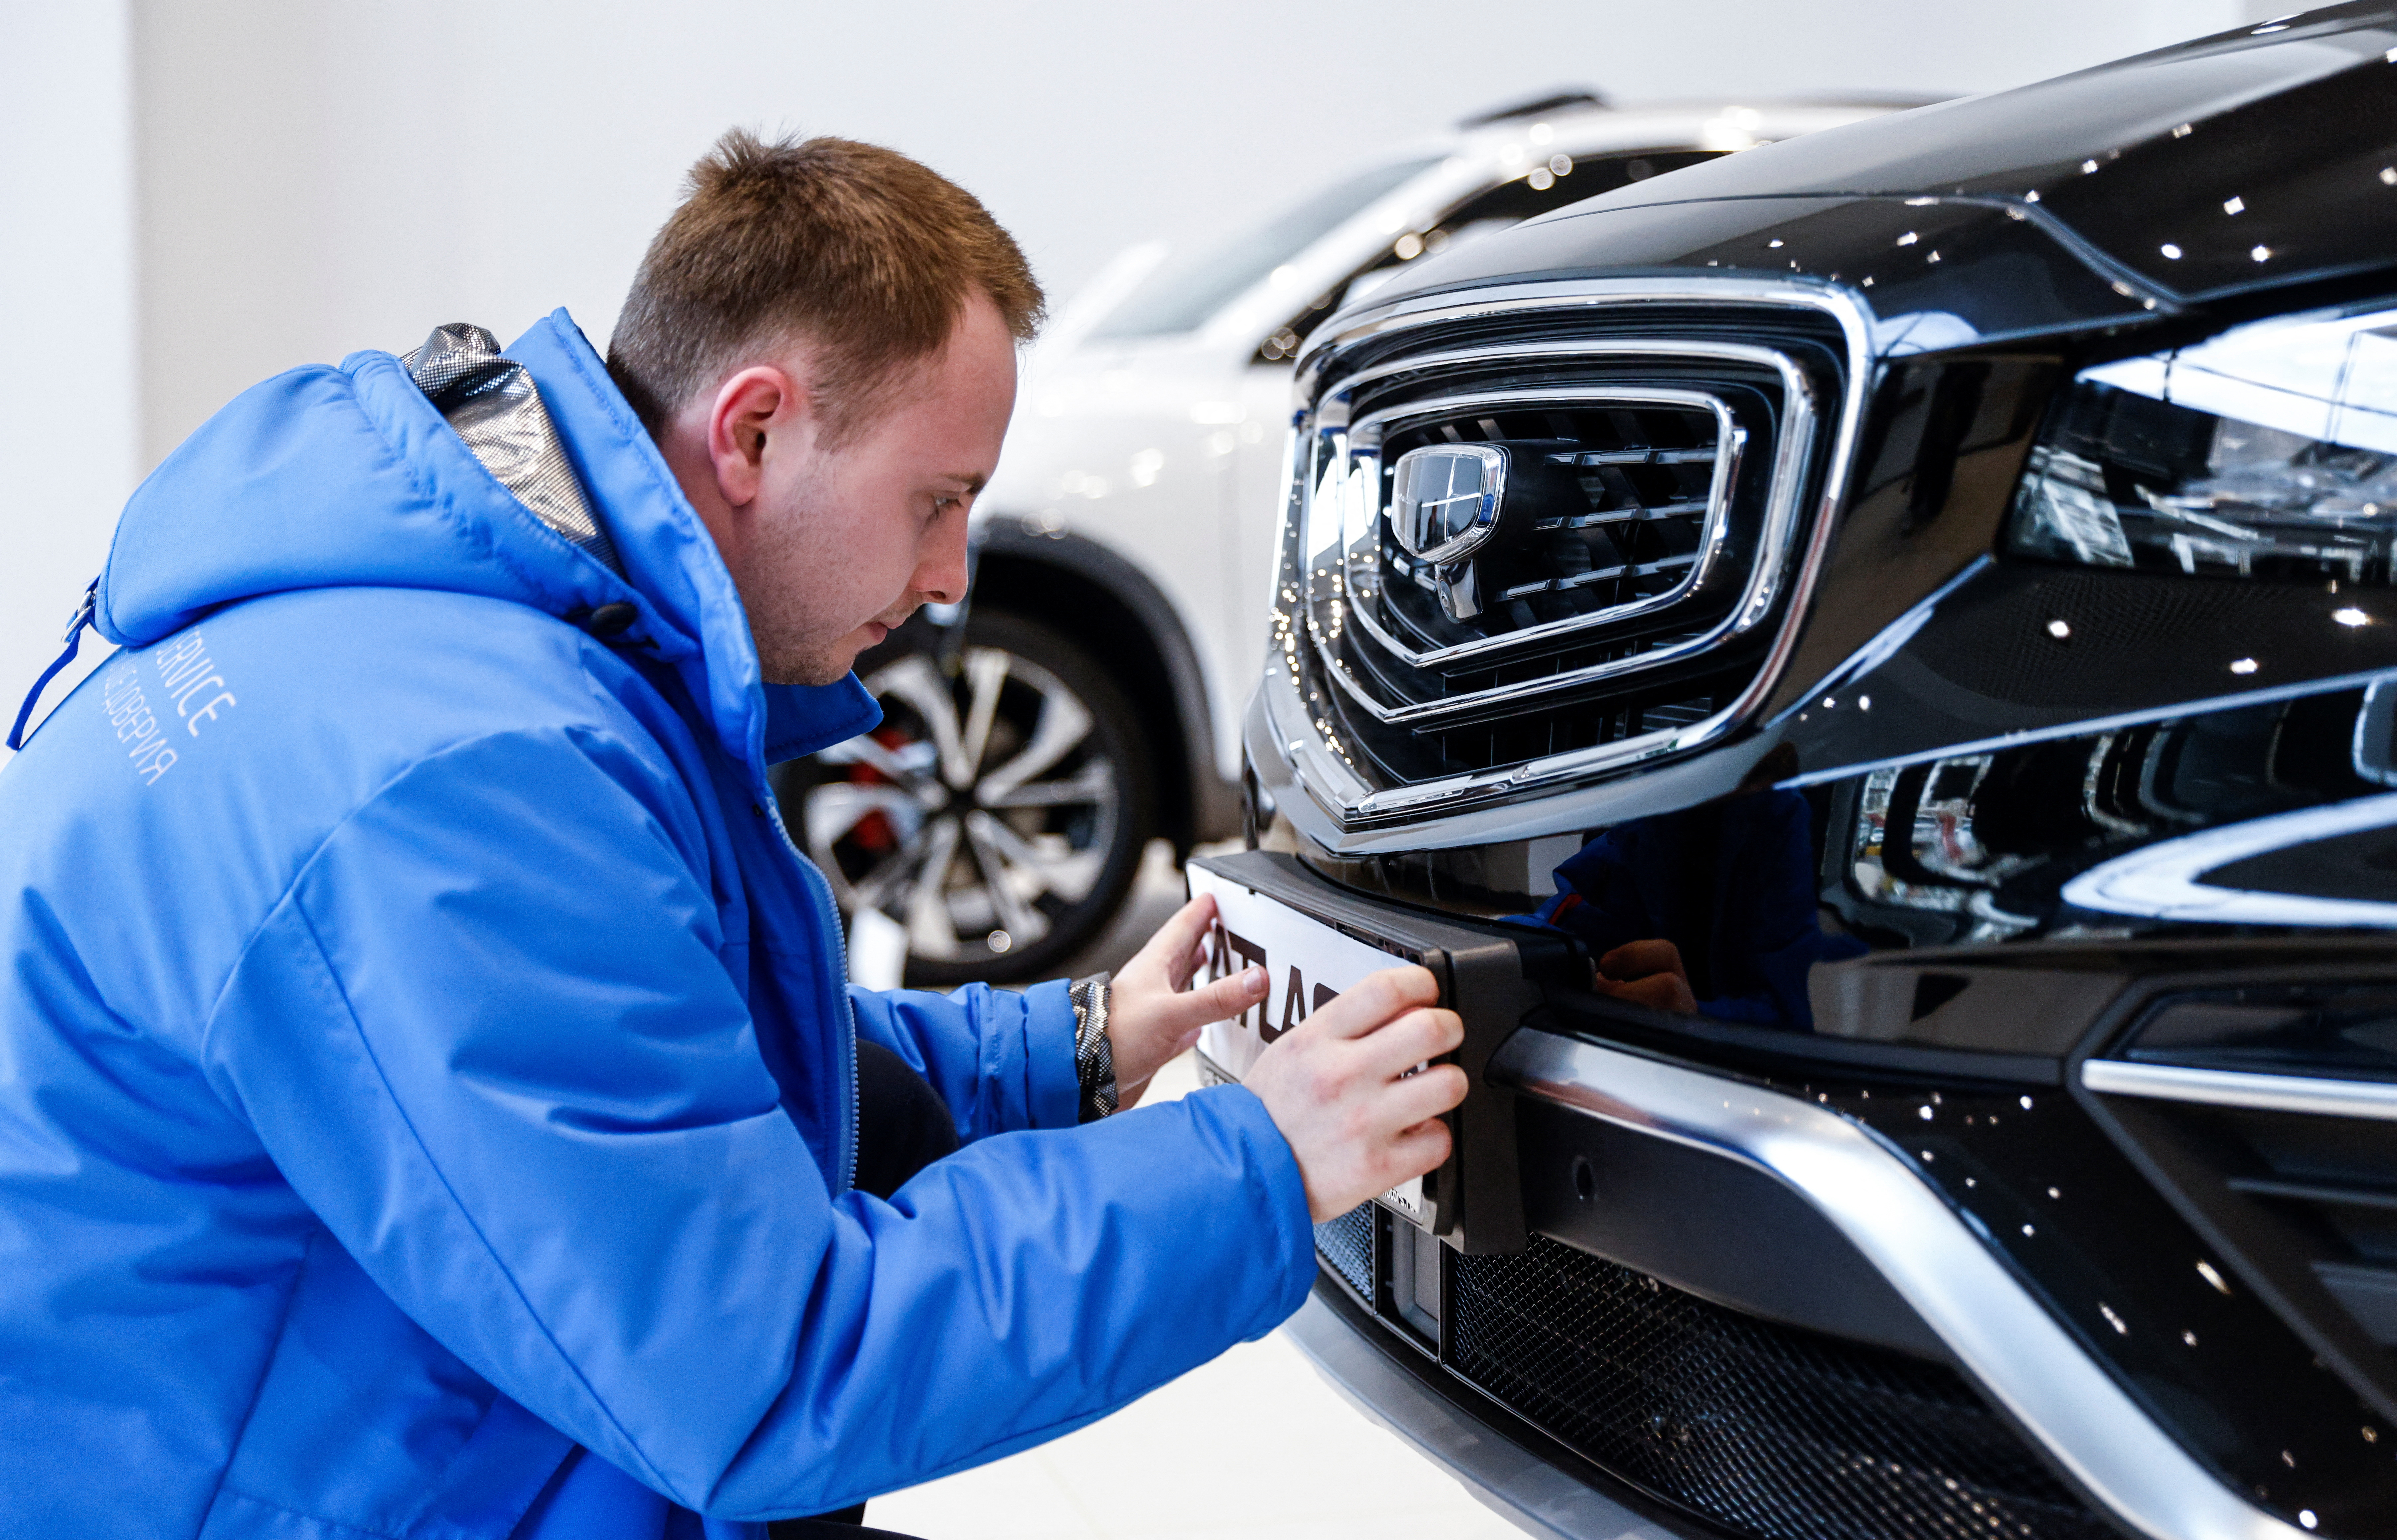 An employee attaches a brand plate to a car produced by Chinese automobile manufacturer Geely at a dealership in Moscow